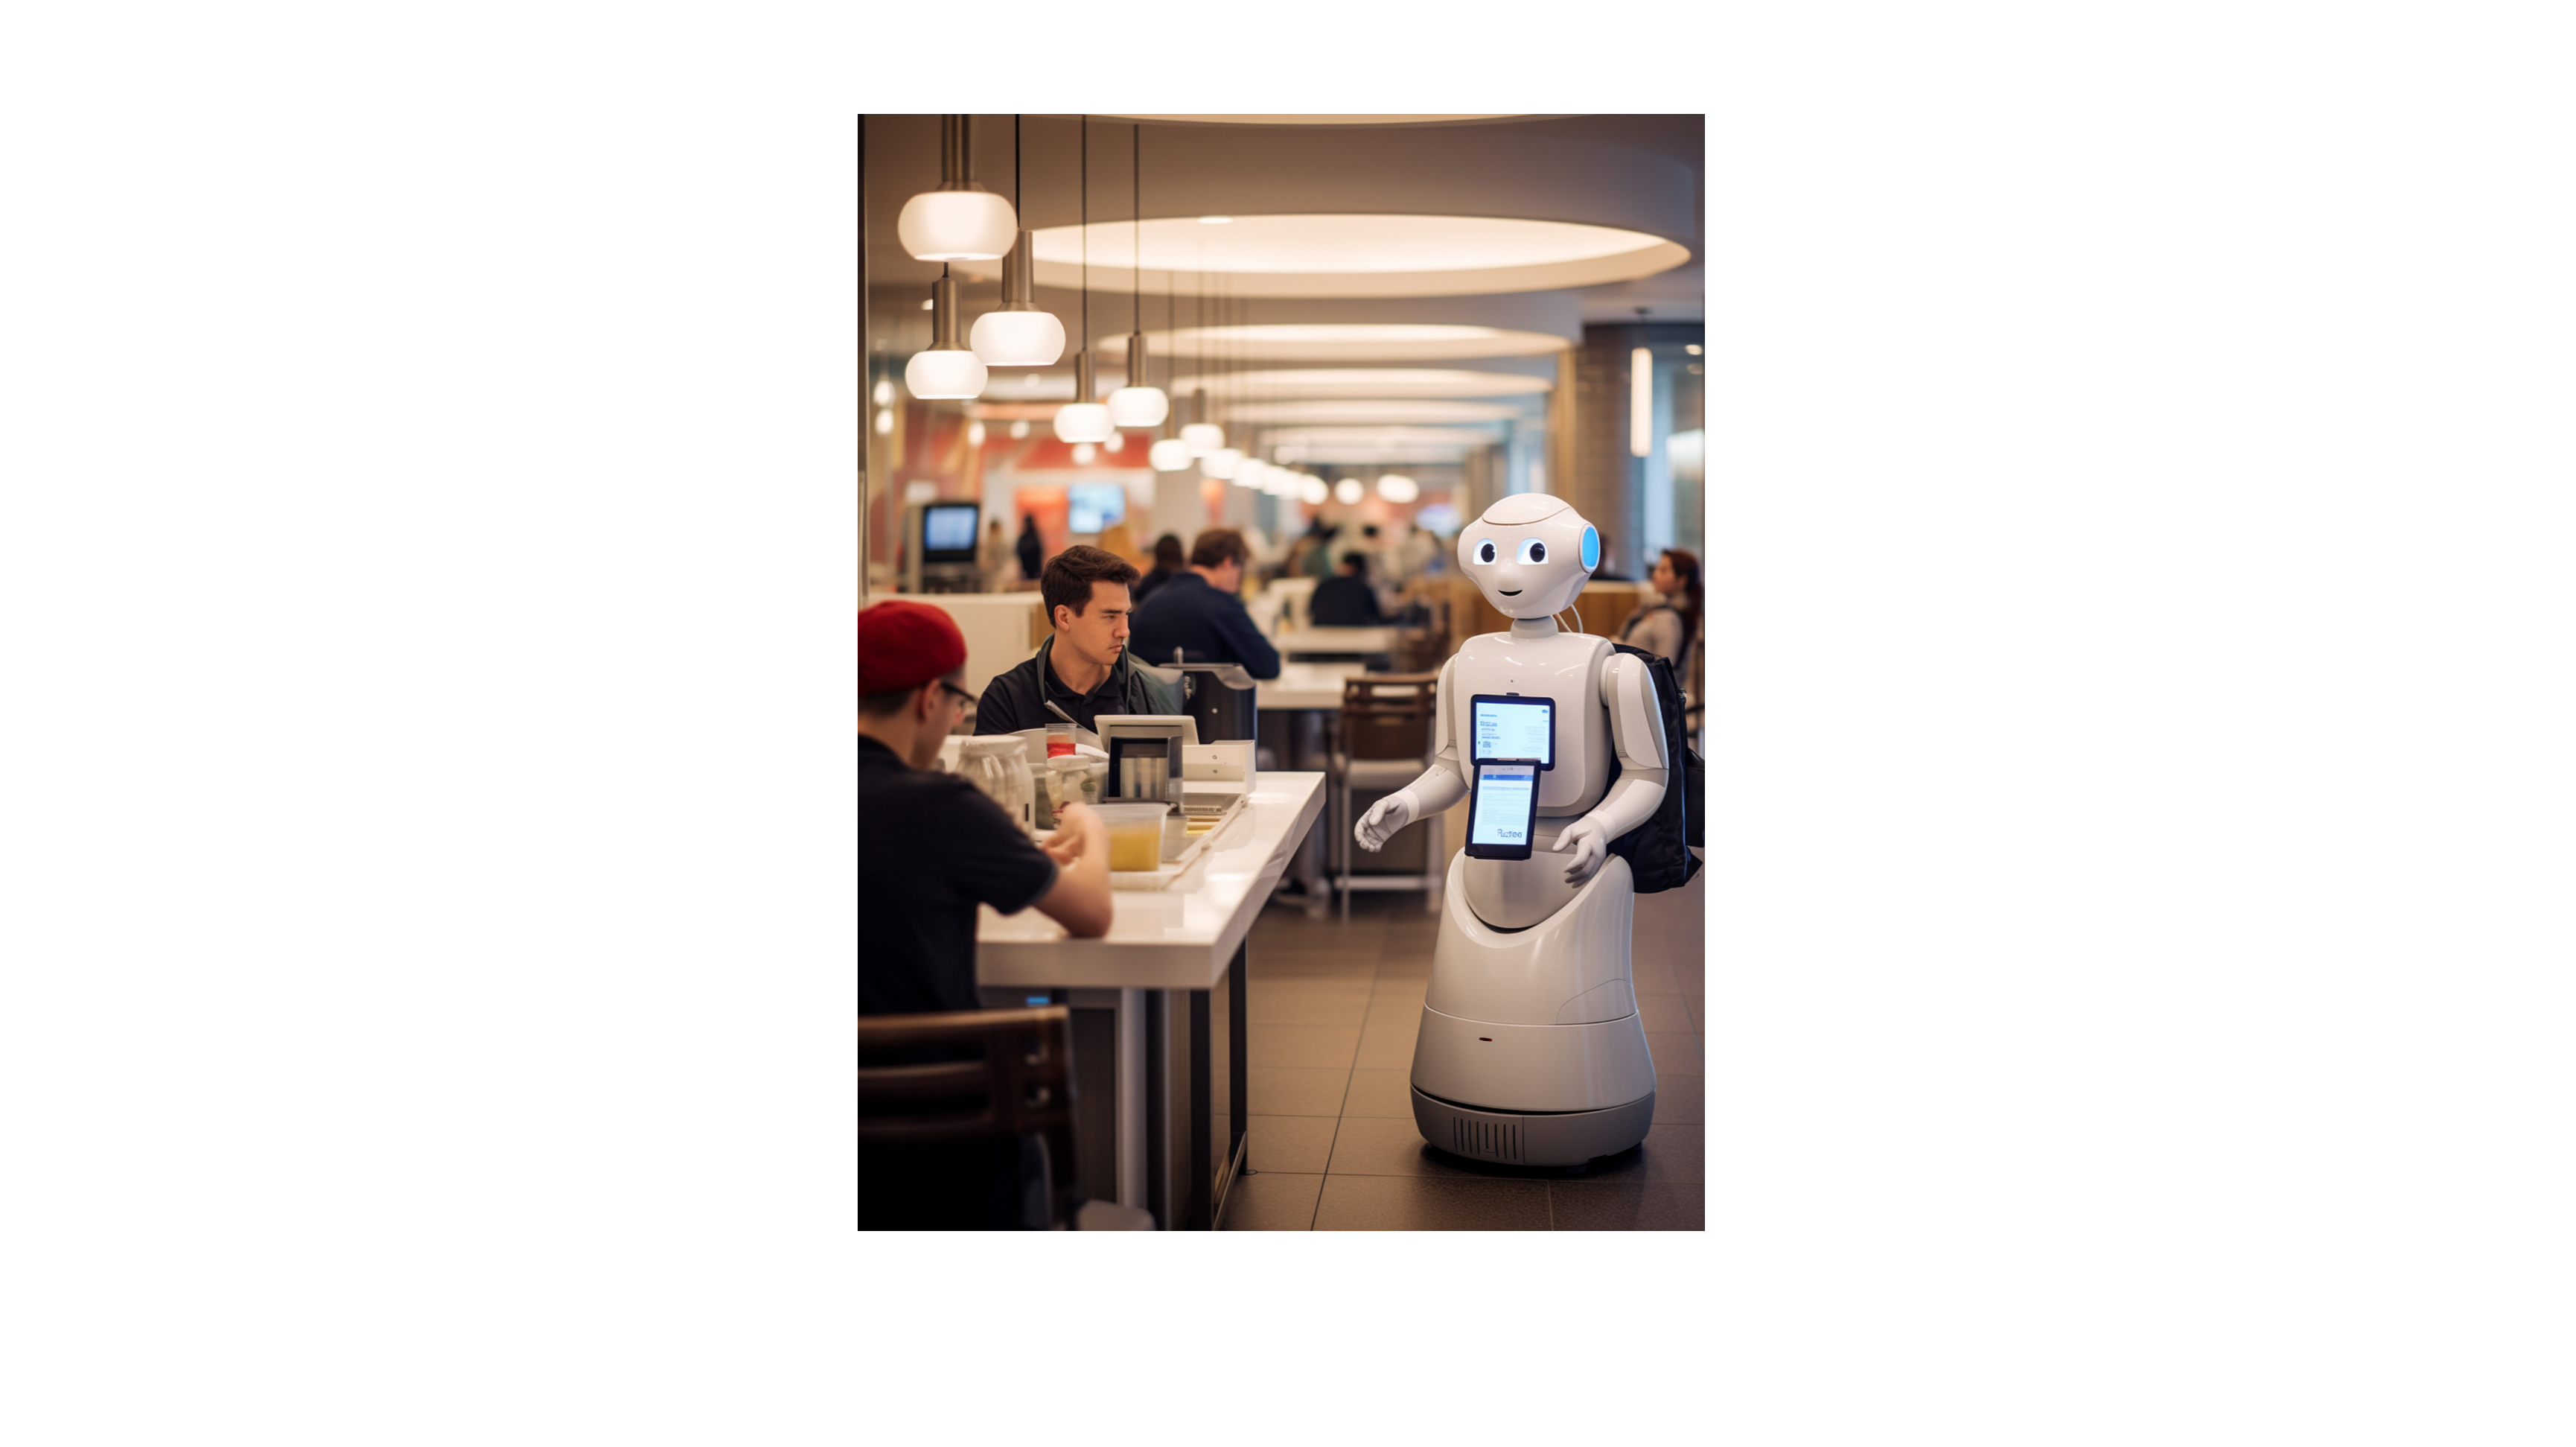 Behind the Scenes: How Smart Dining Robots Work